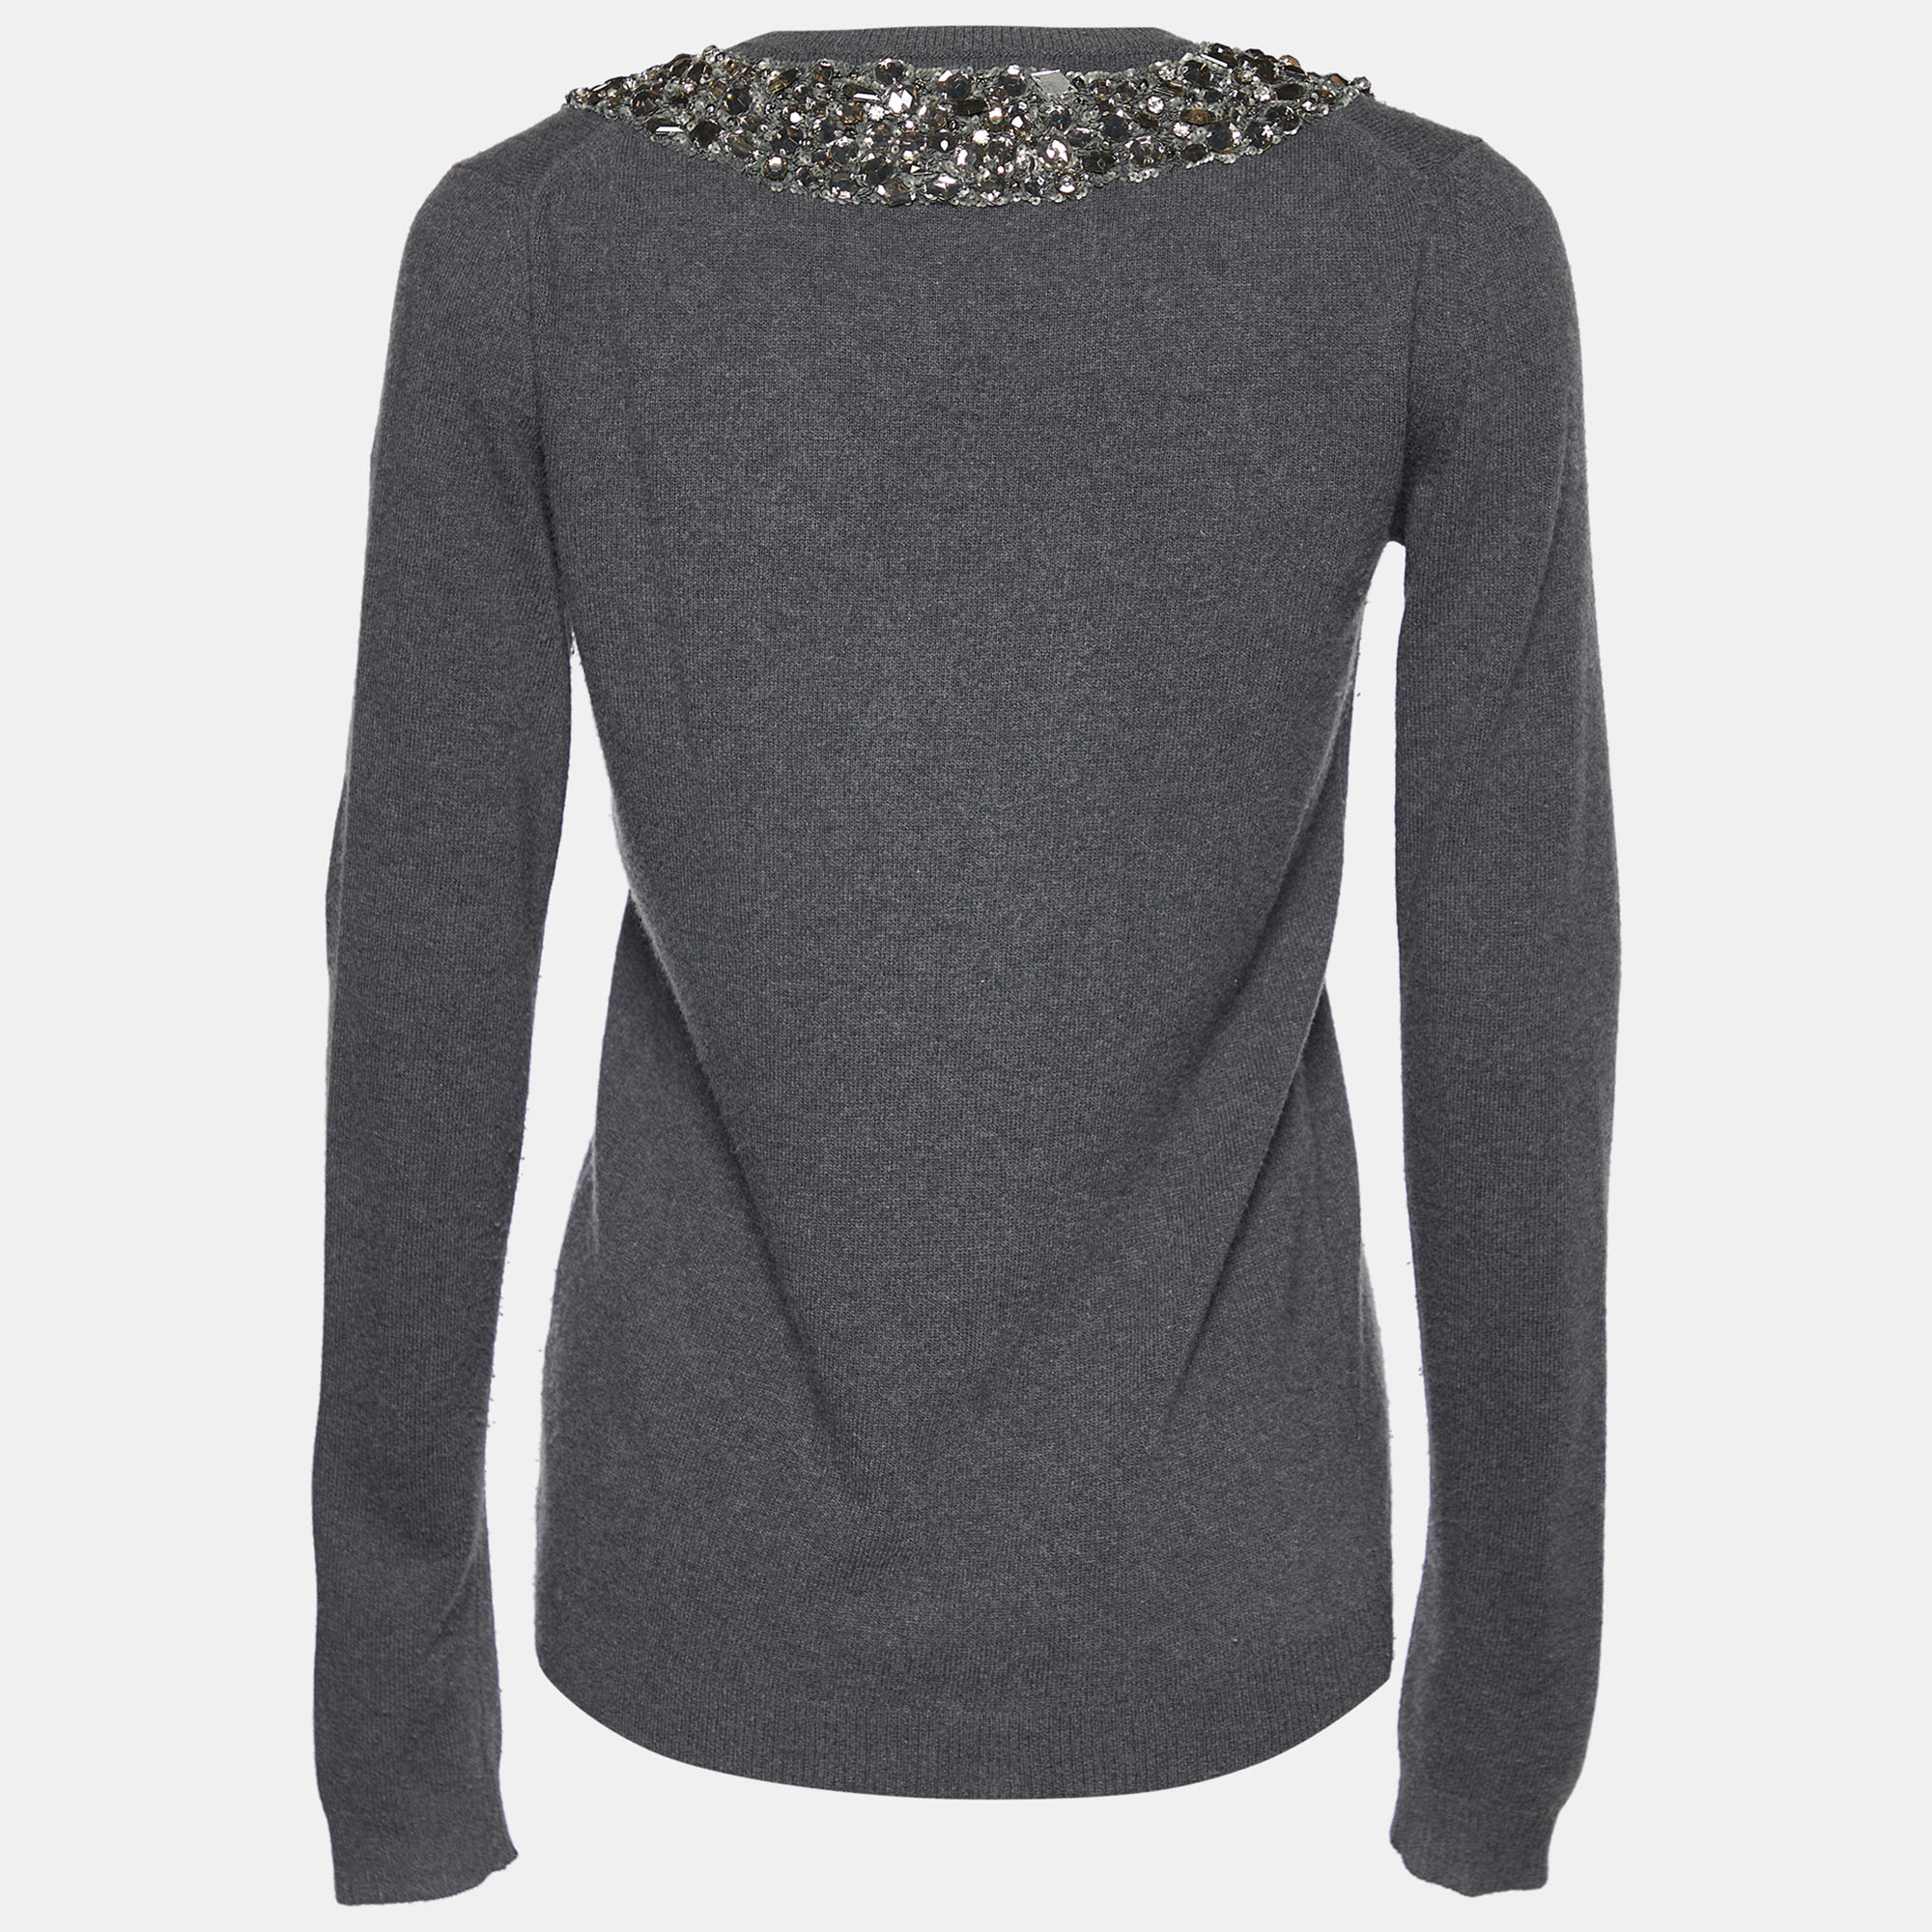 

Burberry Prorsum Grey Wool & Cashmere Embellished Neck Sweater